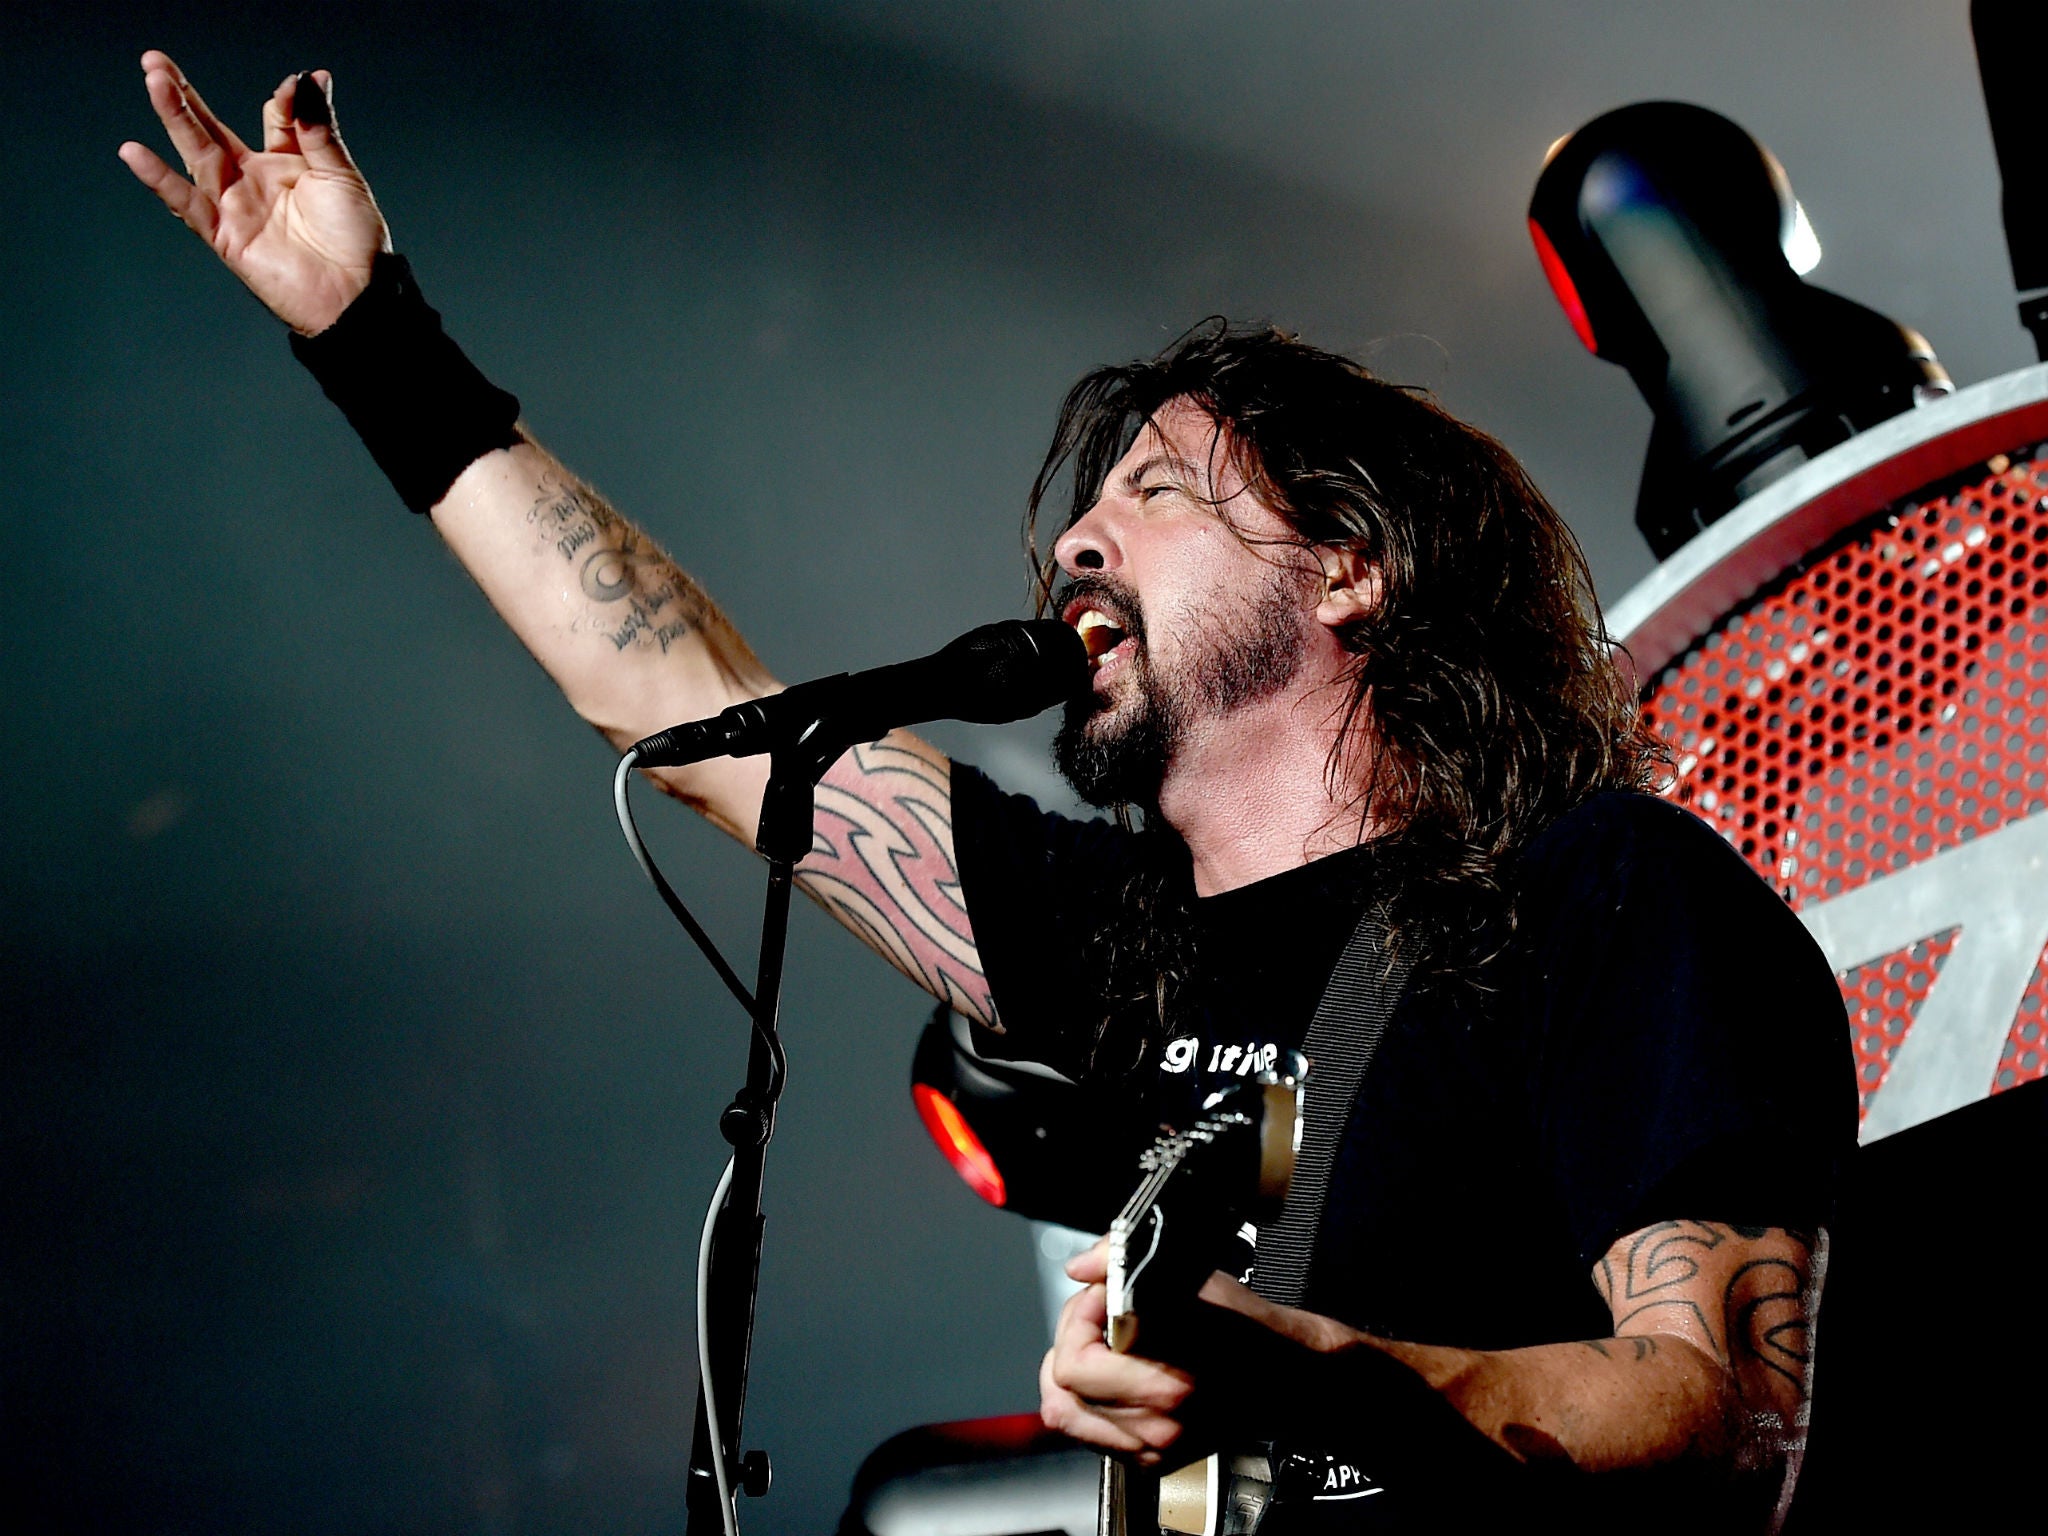 Dave Grohl has been performing in a throne for months after breaking his leg